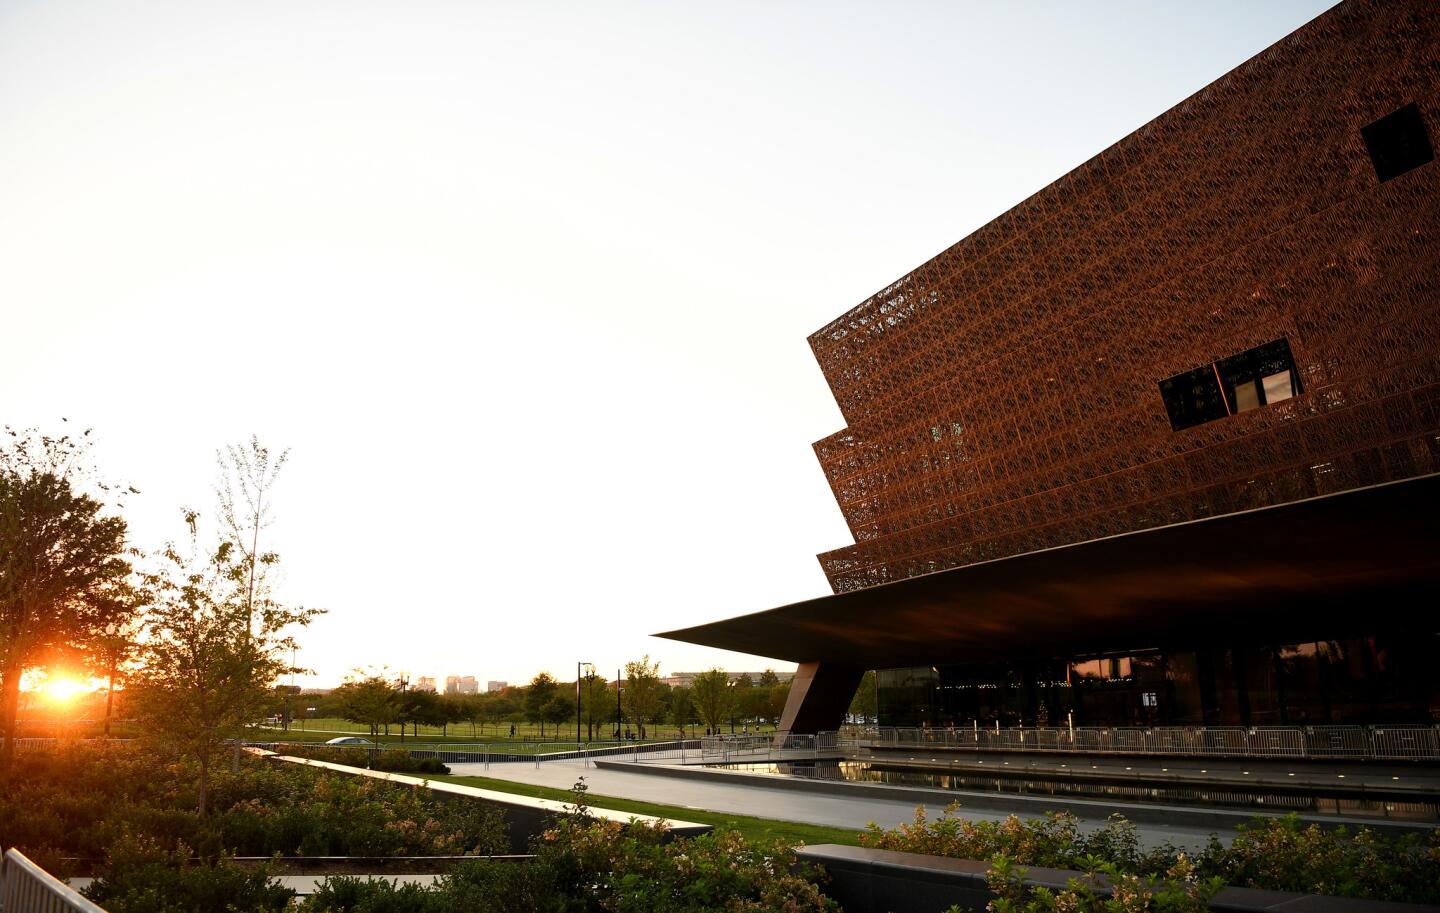 The National Museum of African American History and Culture in Washington D.C.